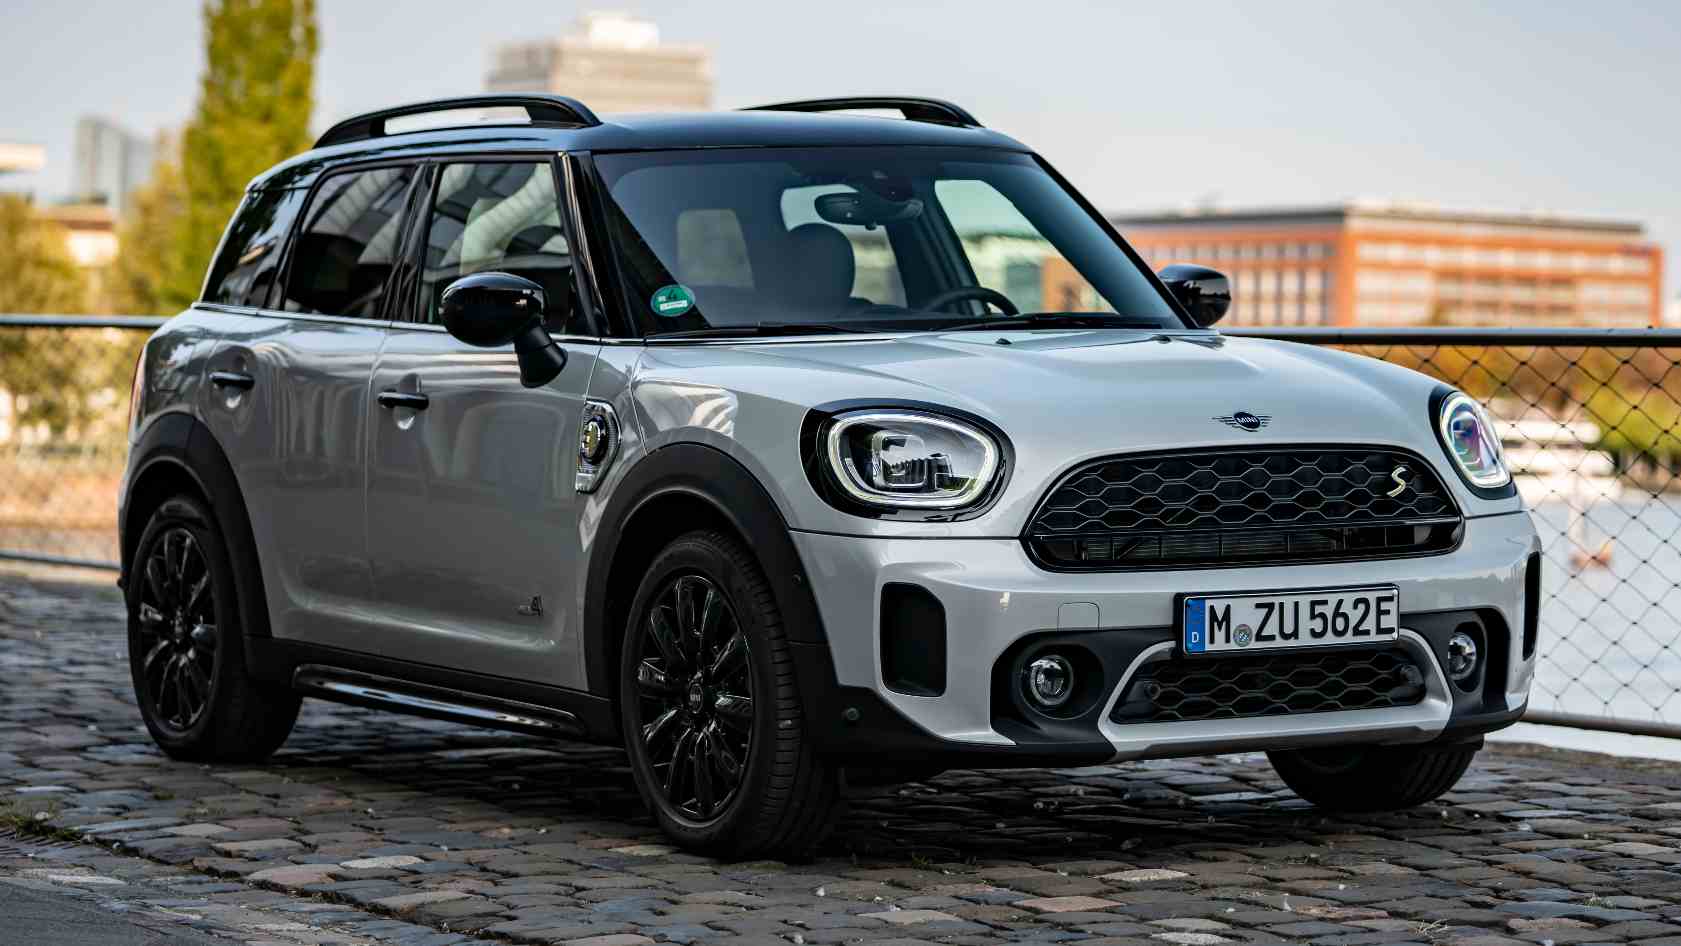  Mini Countryman facelift launched in India at Rs 39.5 lakh, available in two variants